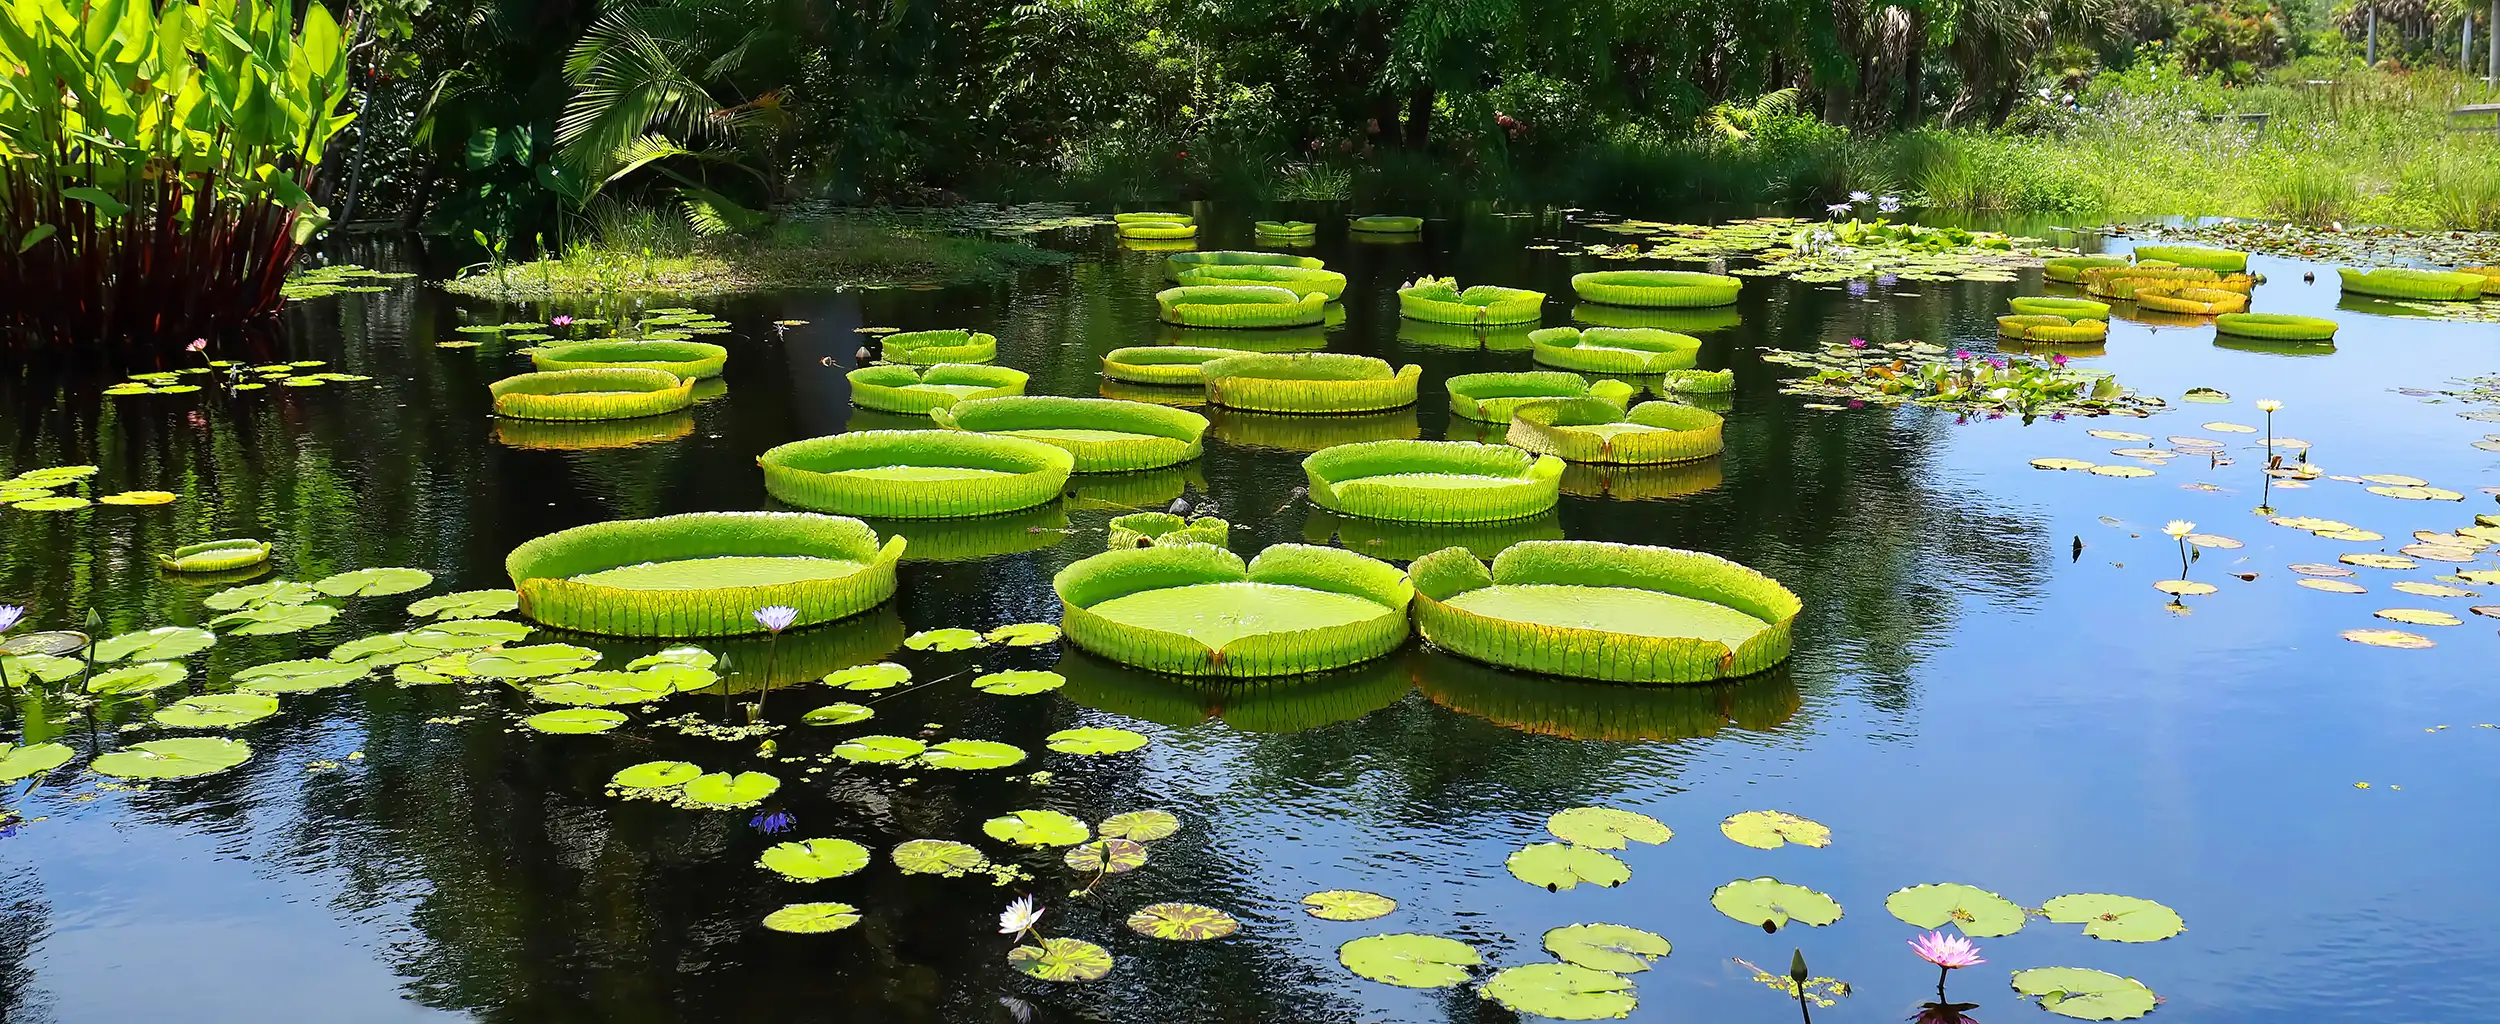 platter,big,florida,amazonica,beautiful,pad,botanical,leaves,postcard,giant,huge,tarzan,naples,large,natural,waterlily,lilies,water,amazon,blooms,background,circle,victoria amazonica,card,pond,gardens,saucer,fl,best,plate,floating,exotic,amazonian,green,nature,leaf,flower,outdoor,tropical,blooming,round,waterlilies,lily,garden,aquatic,royal,wild,landscape,lilly;